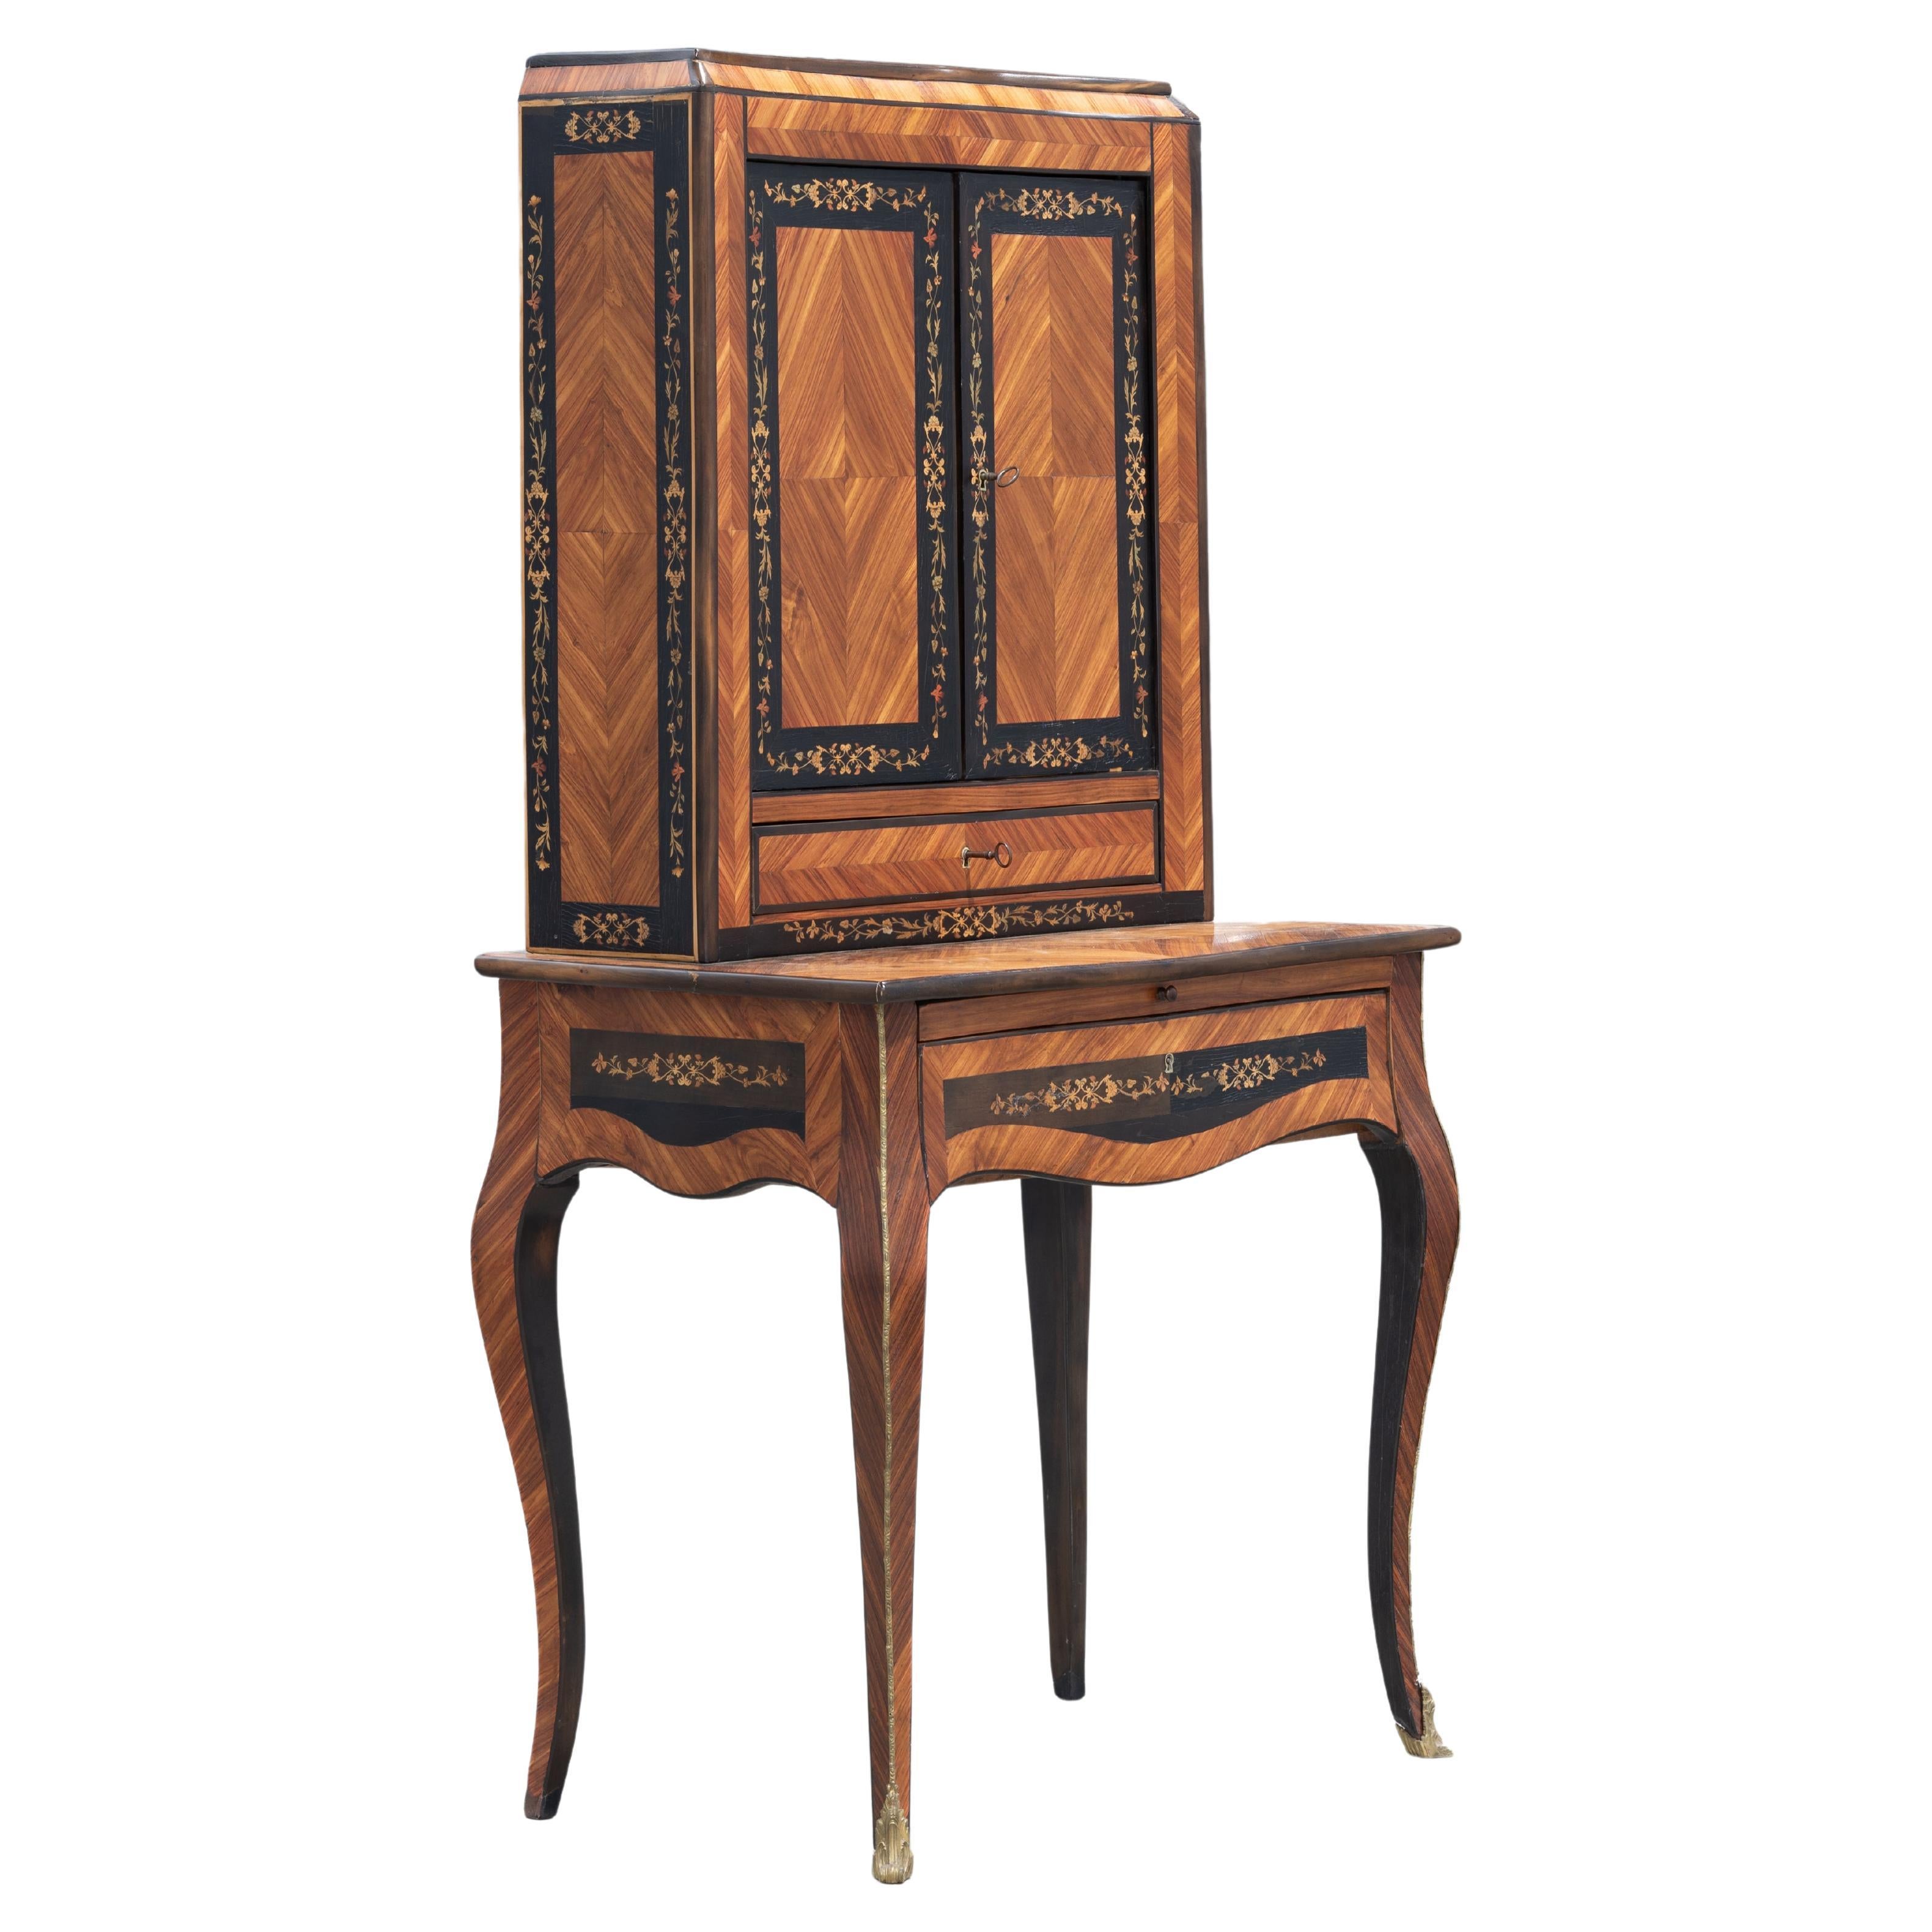 Marquetry Case Pieces and Storage Cabinets